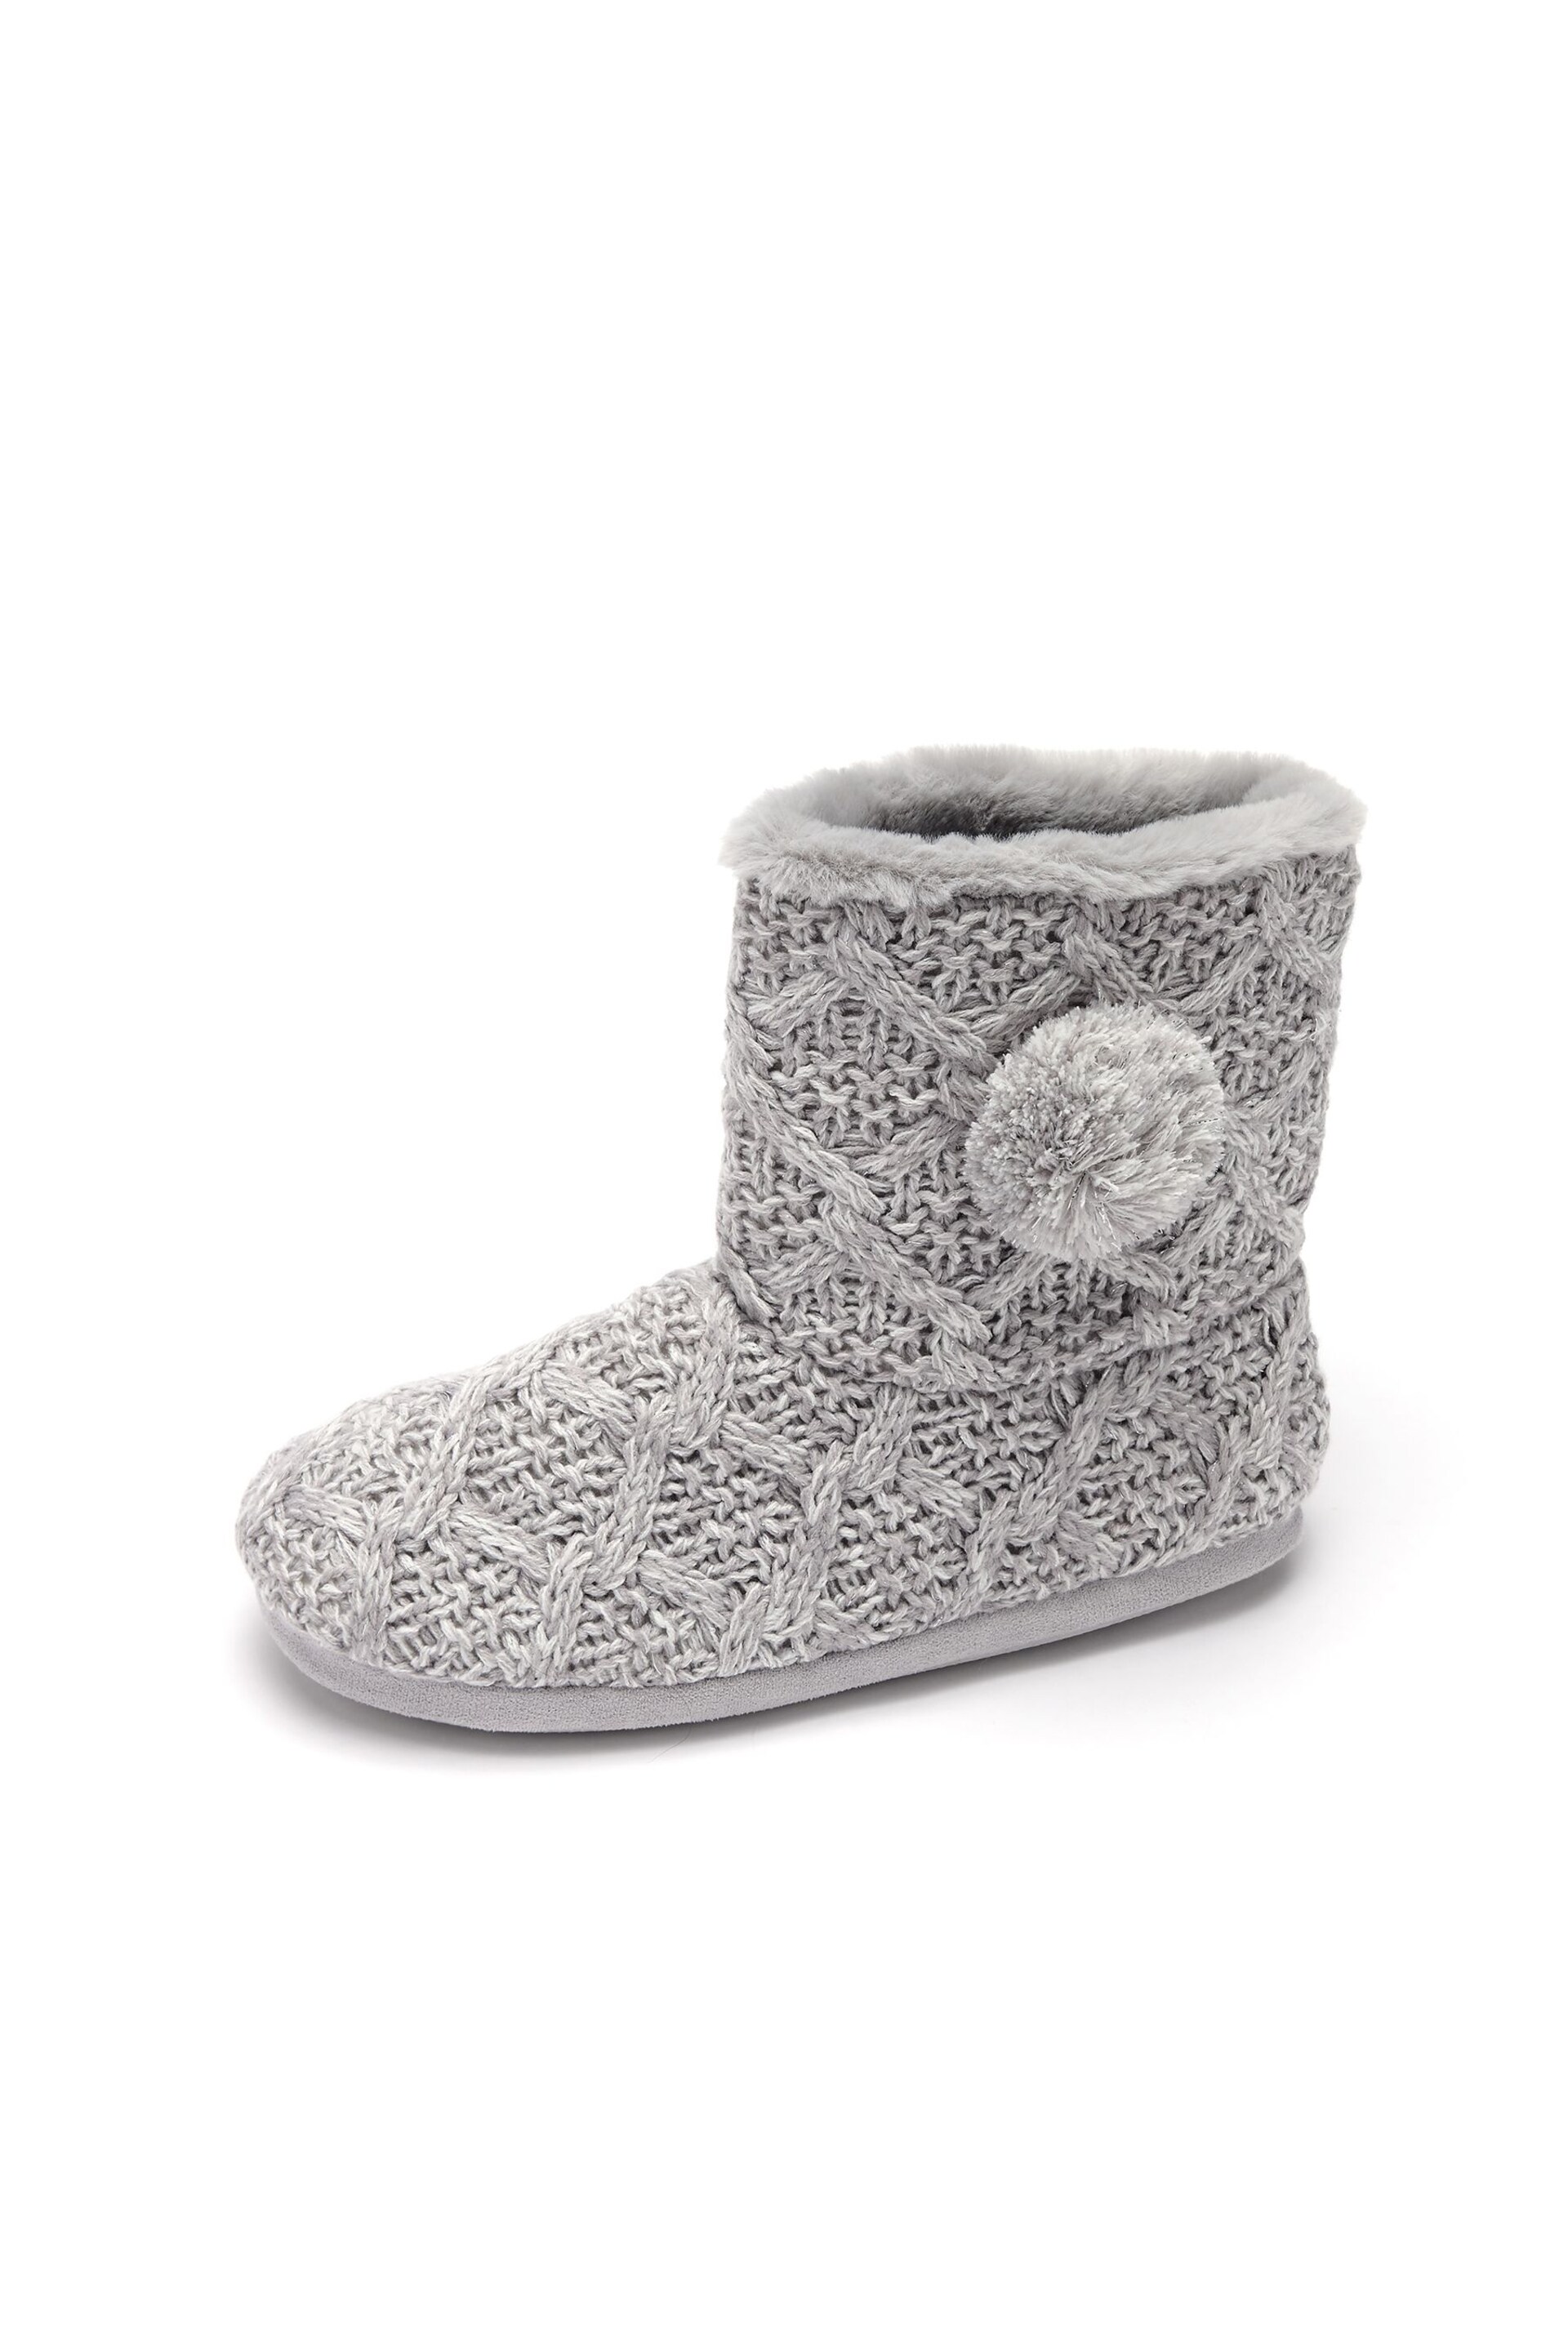 Pour Moi Grey Cable Knit Faux Fur Lined Bootie Slippers - Image 3 of 3